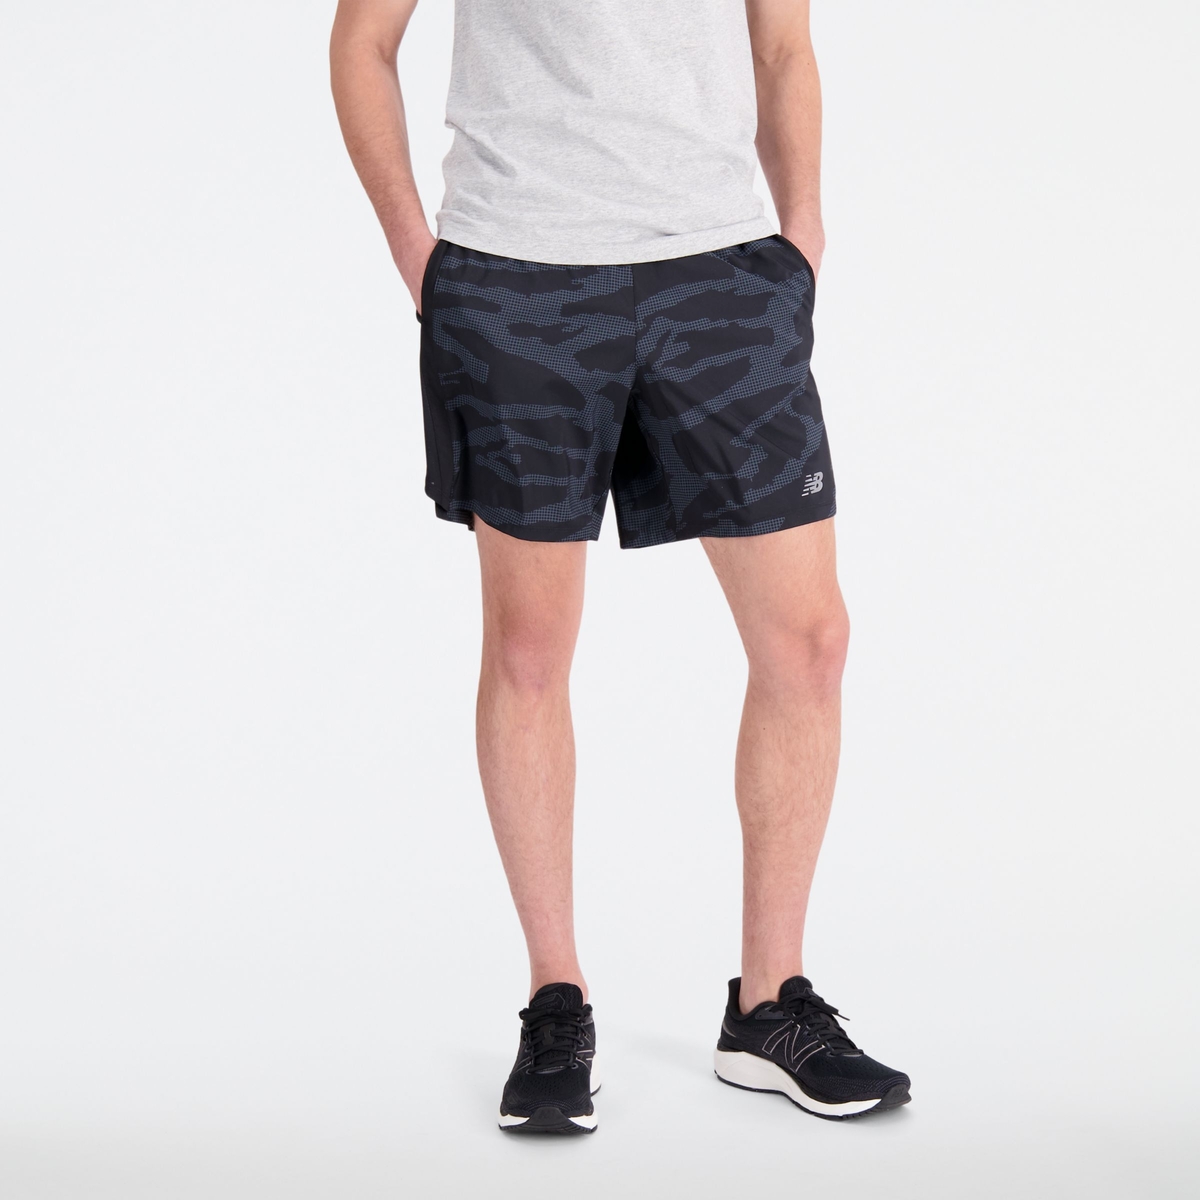 Buy Printed Accelerate 7 Inch Short online